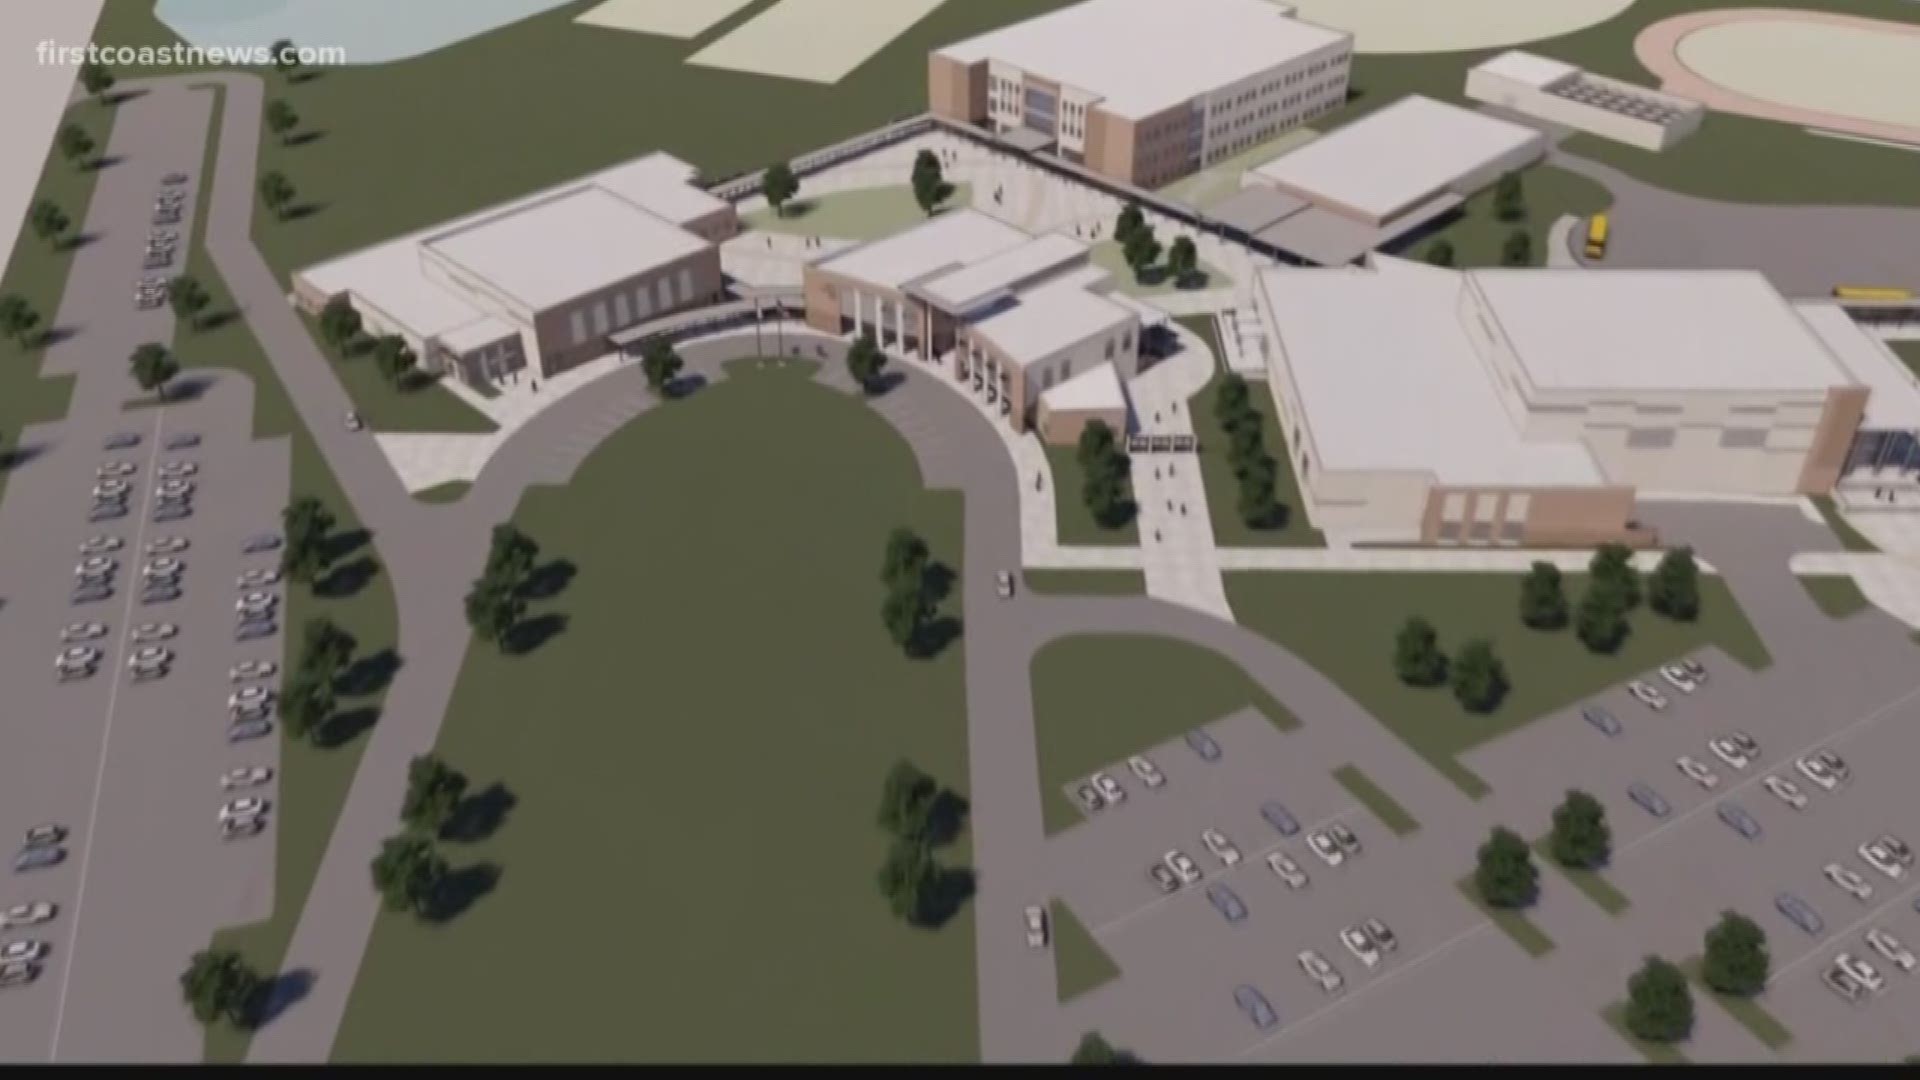 One parent says the new high school, expected to be finished in 2021, will cut down what could have been a 30 to 40 minute commute to Nease High School.